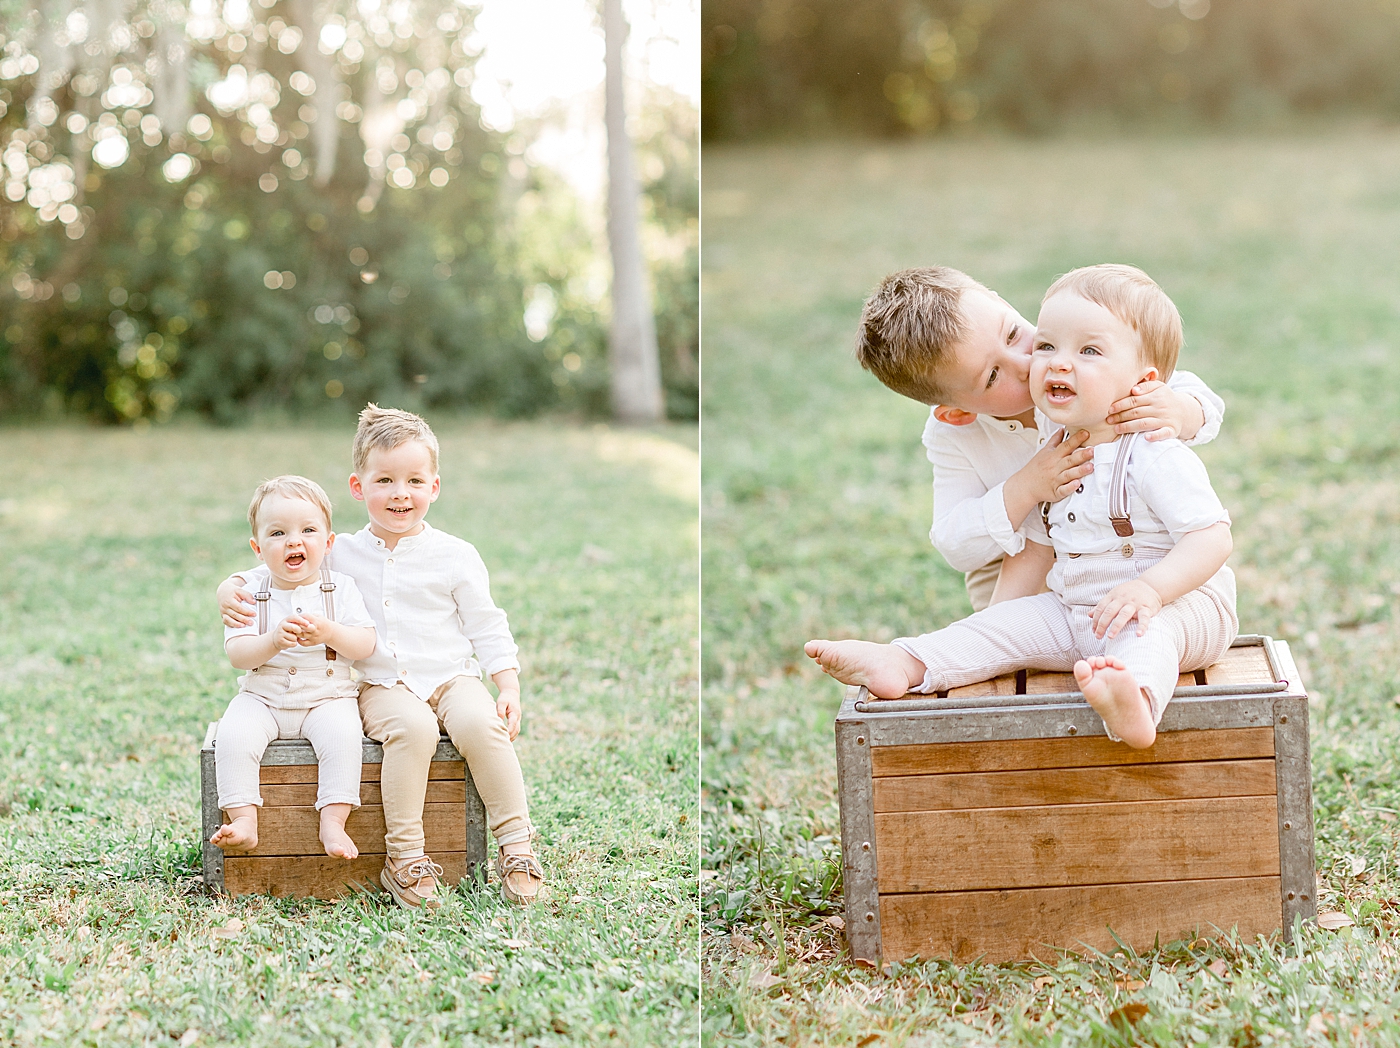 Two brothers sitting on wood crate for youngest brothers birthday photoshoot. Photo by Brittany Elise Photography.